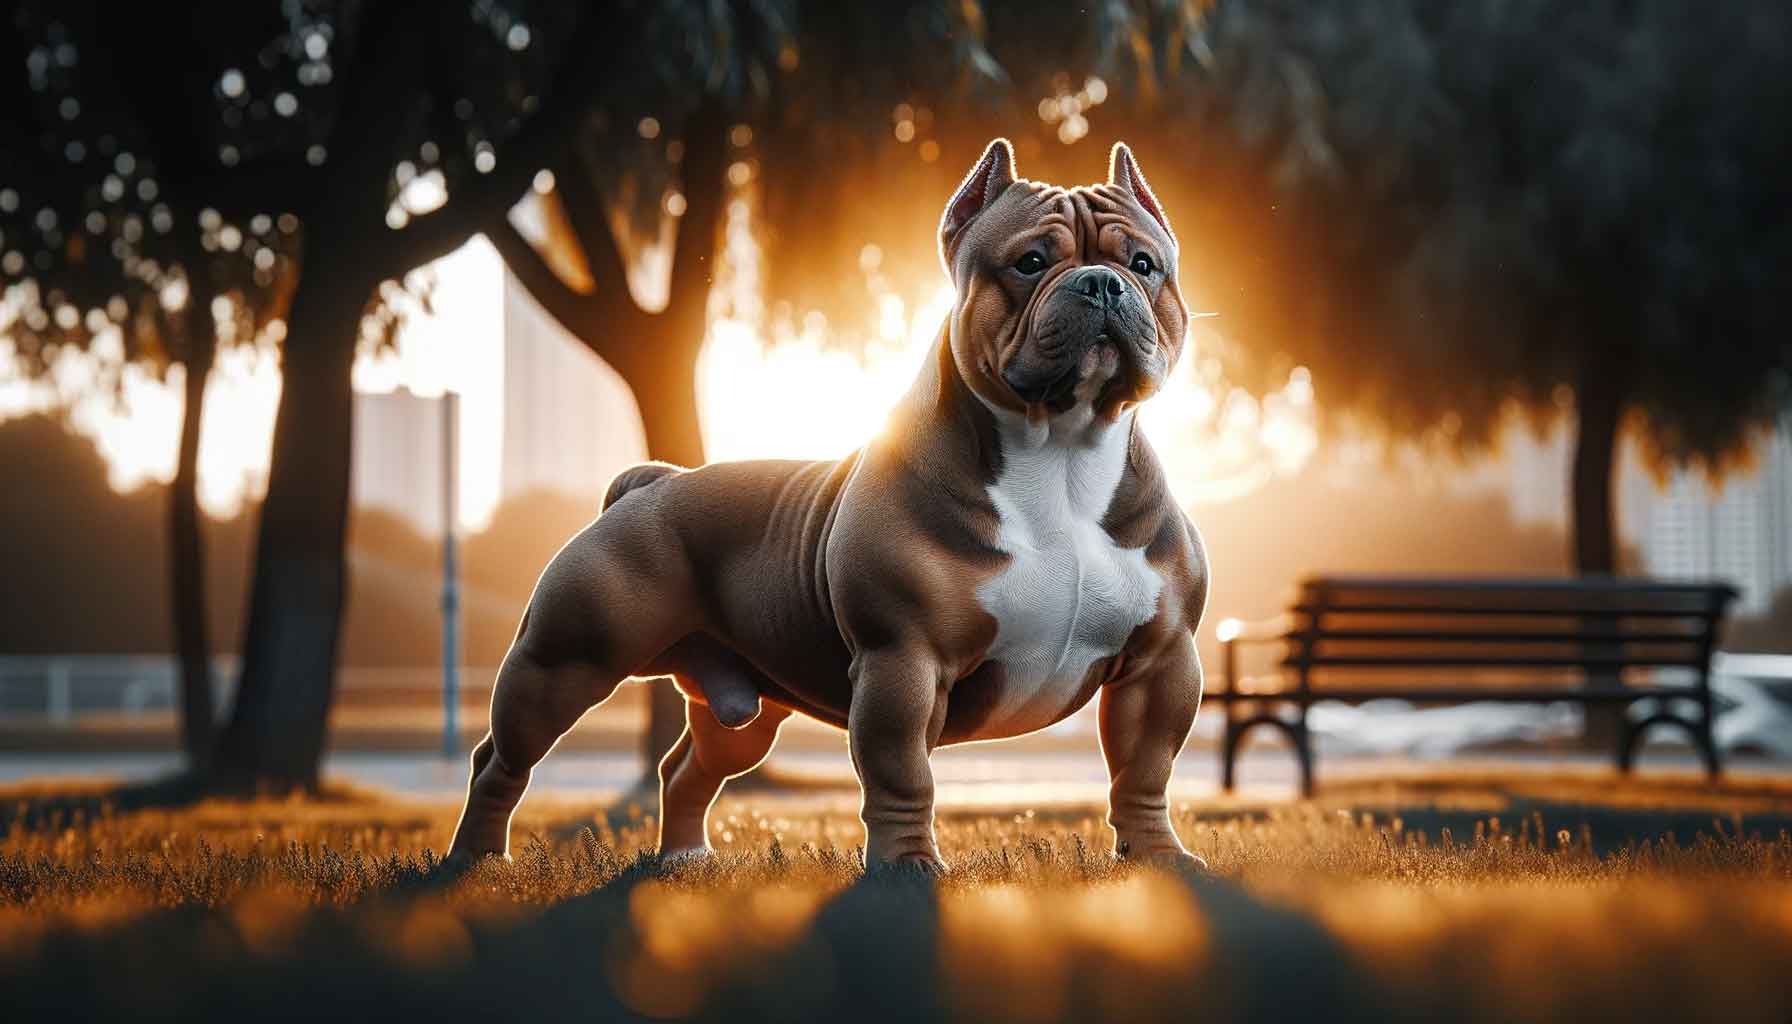 XL micro bully dog standing confidently in an outdoor park, illuminated by the golden light of a setting sun.